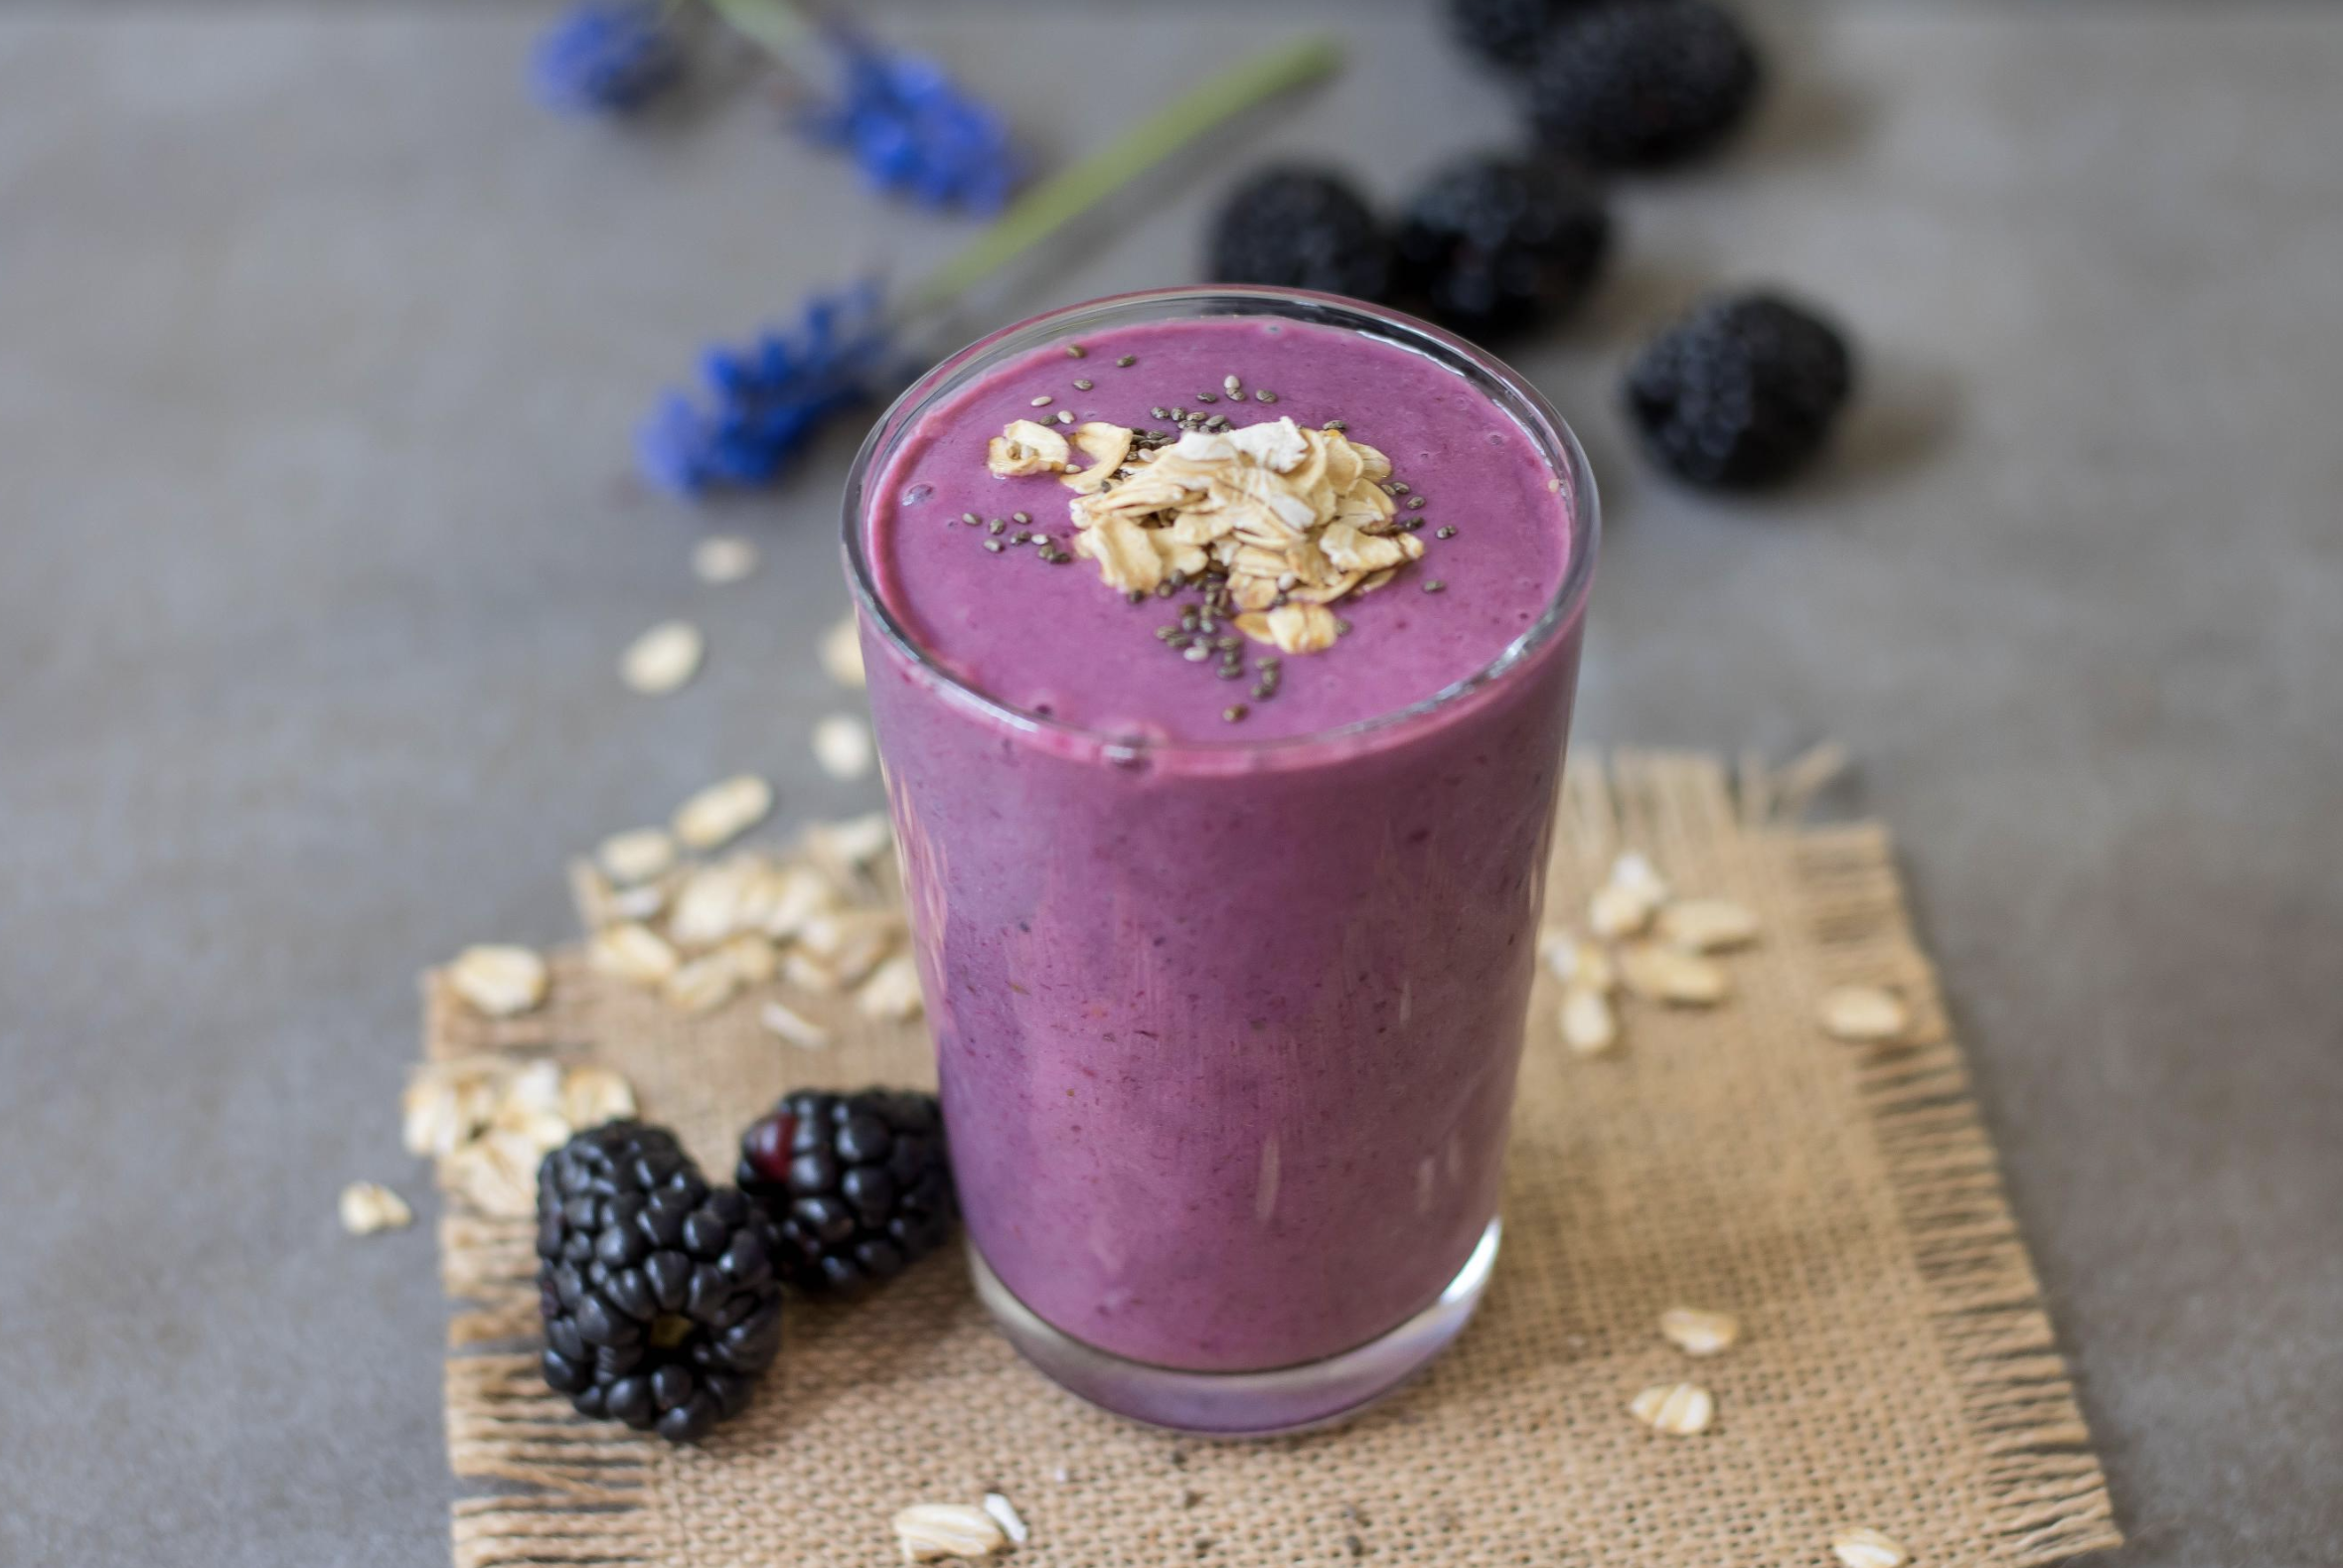 Say bye-bye to fatty, high calorie foods and say hello to refreshing smoothie recipes! Here are 17 delicious New Year smoothie recipes for a fresh start! 